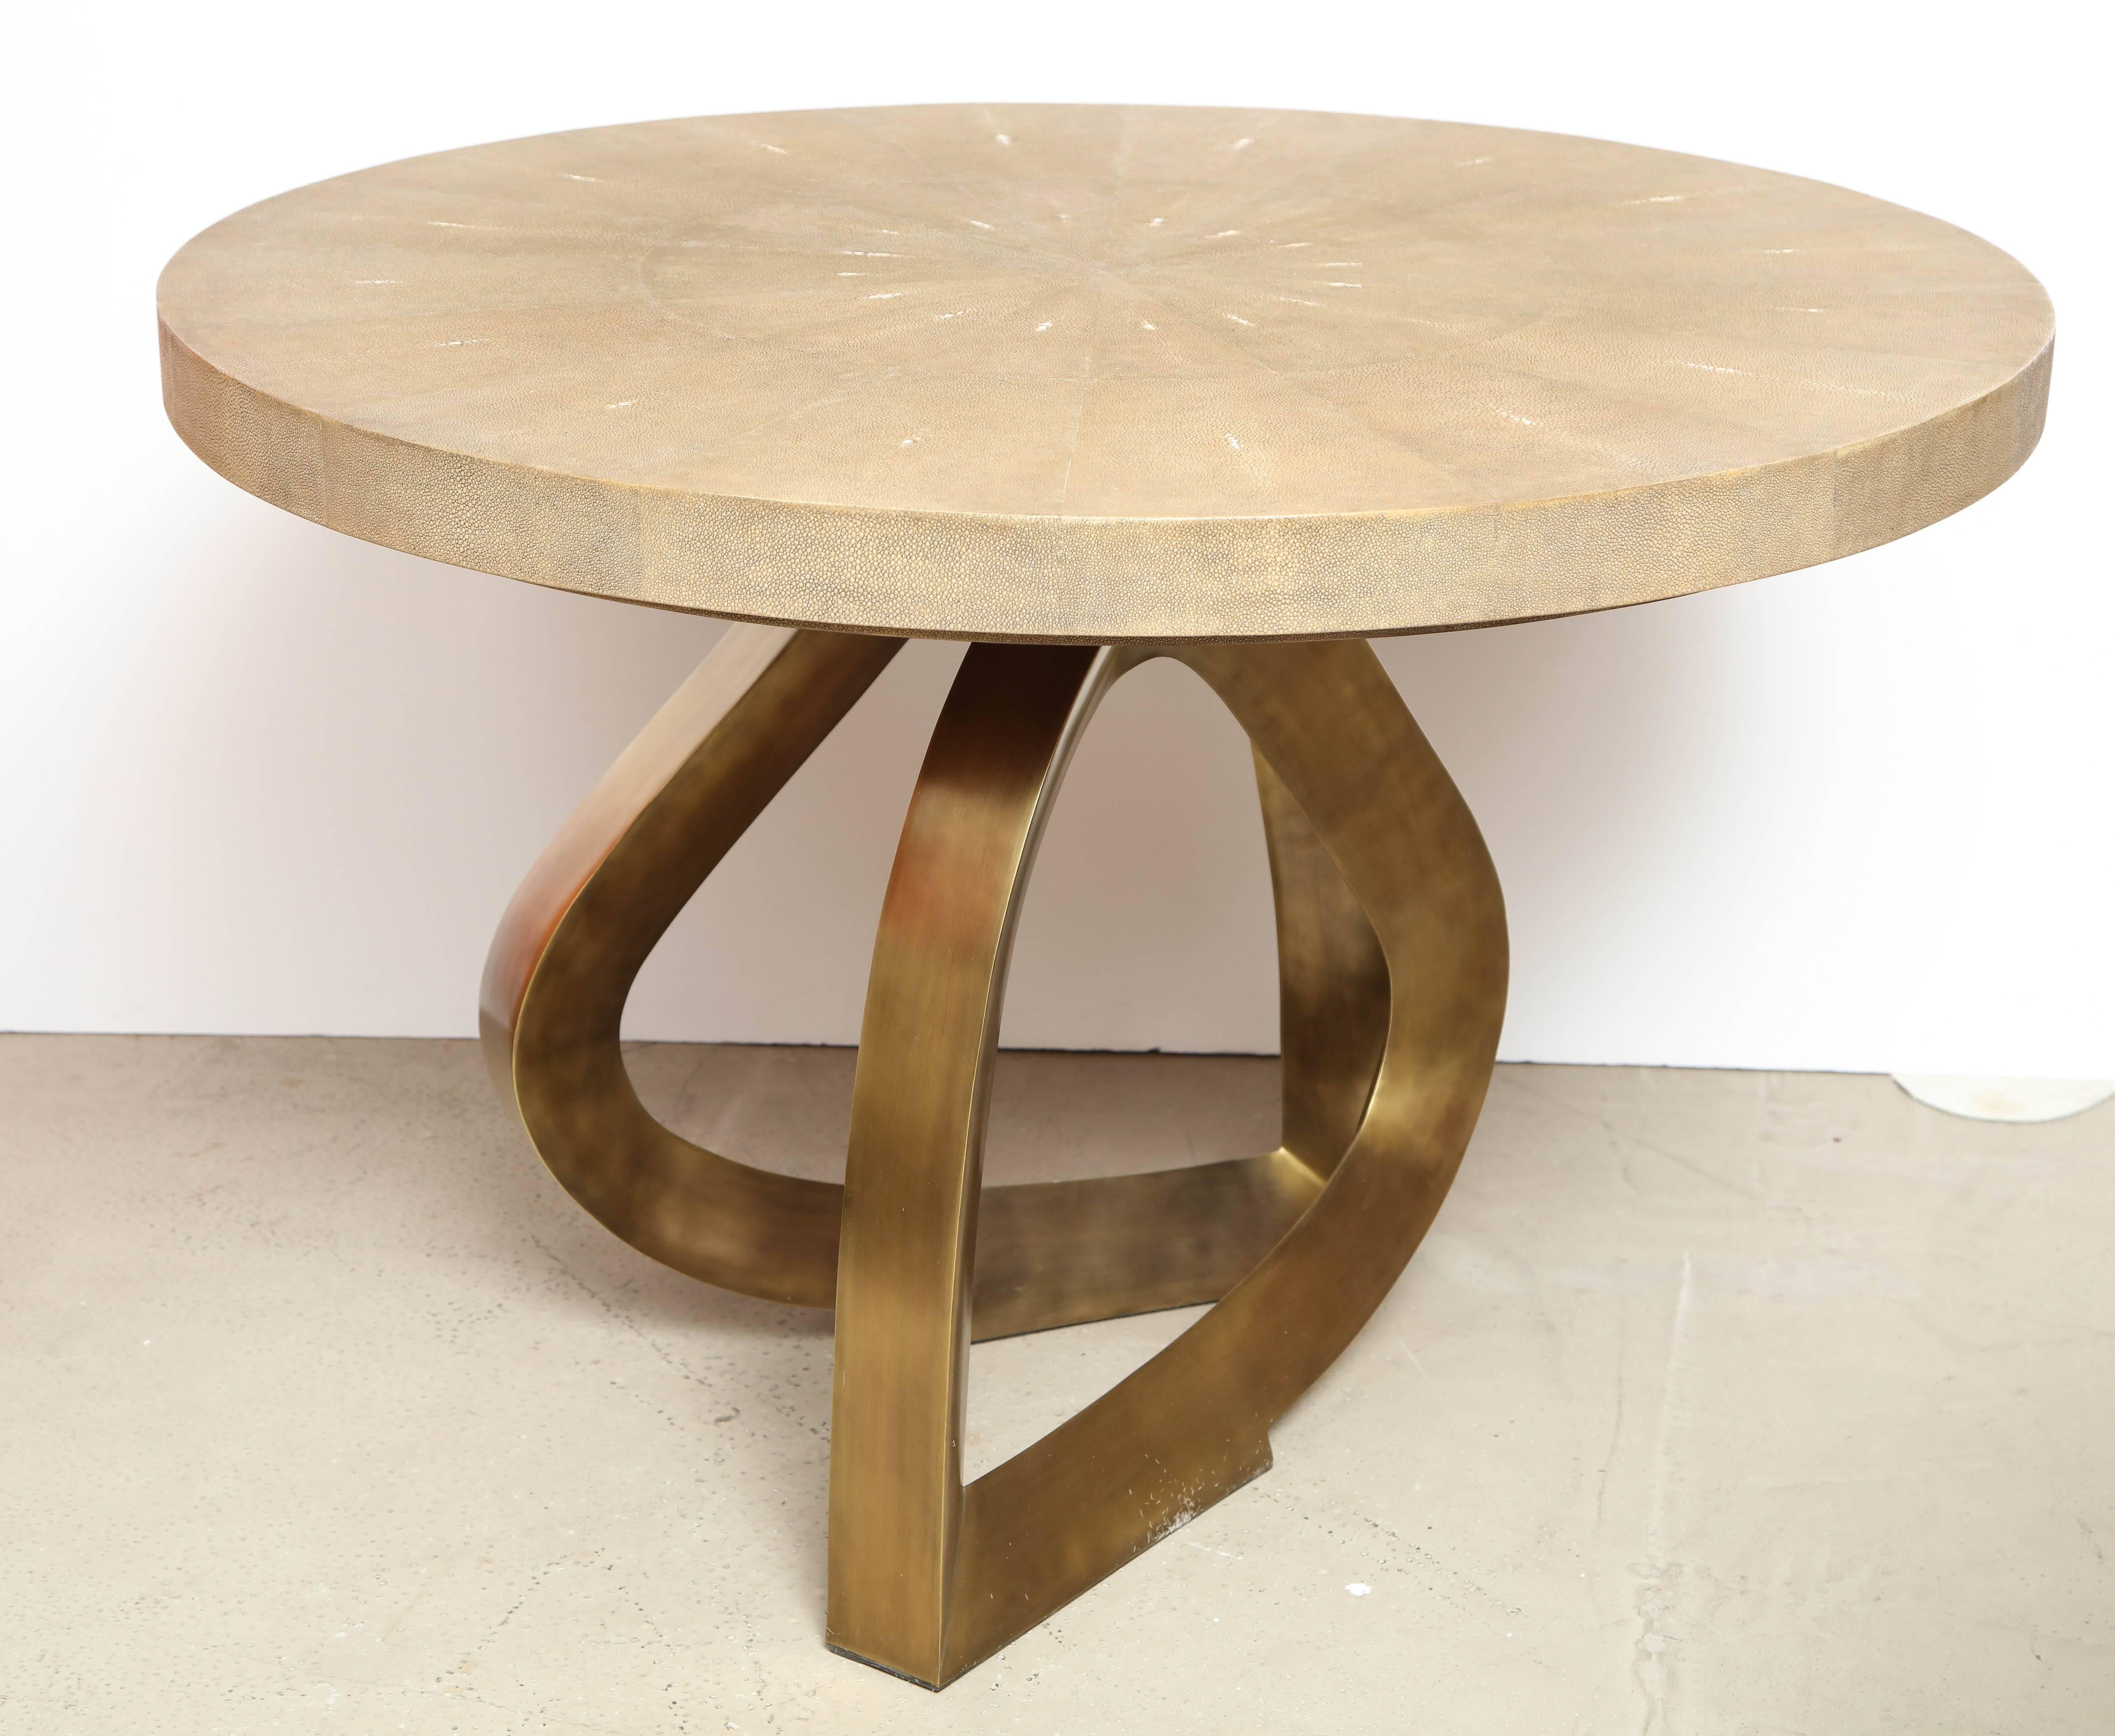 Shagreen Dining Room Table with Brass Base, Contemporary, Khaki Color Shagreen 1